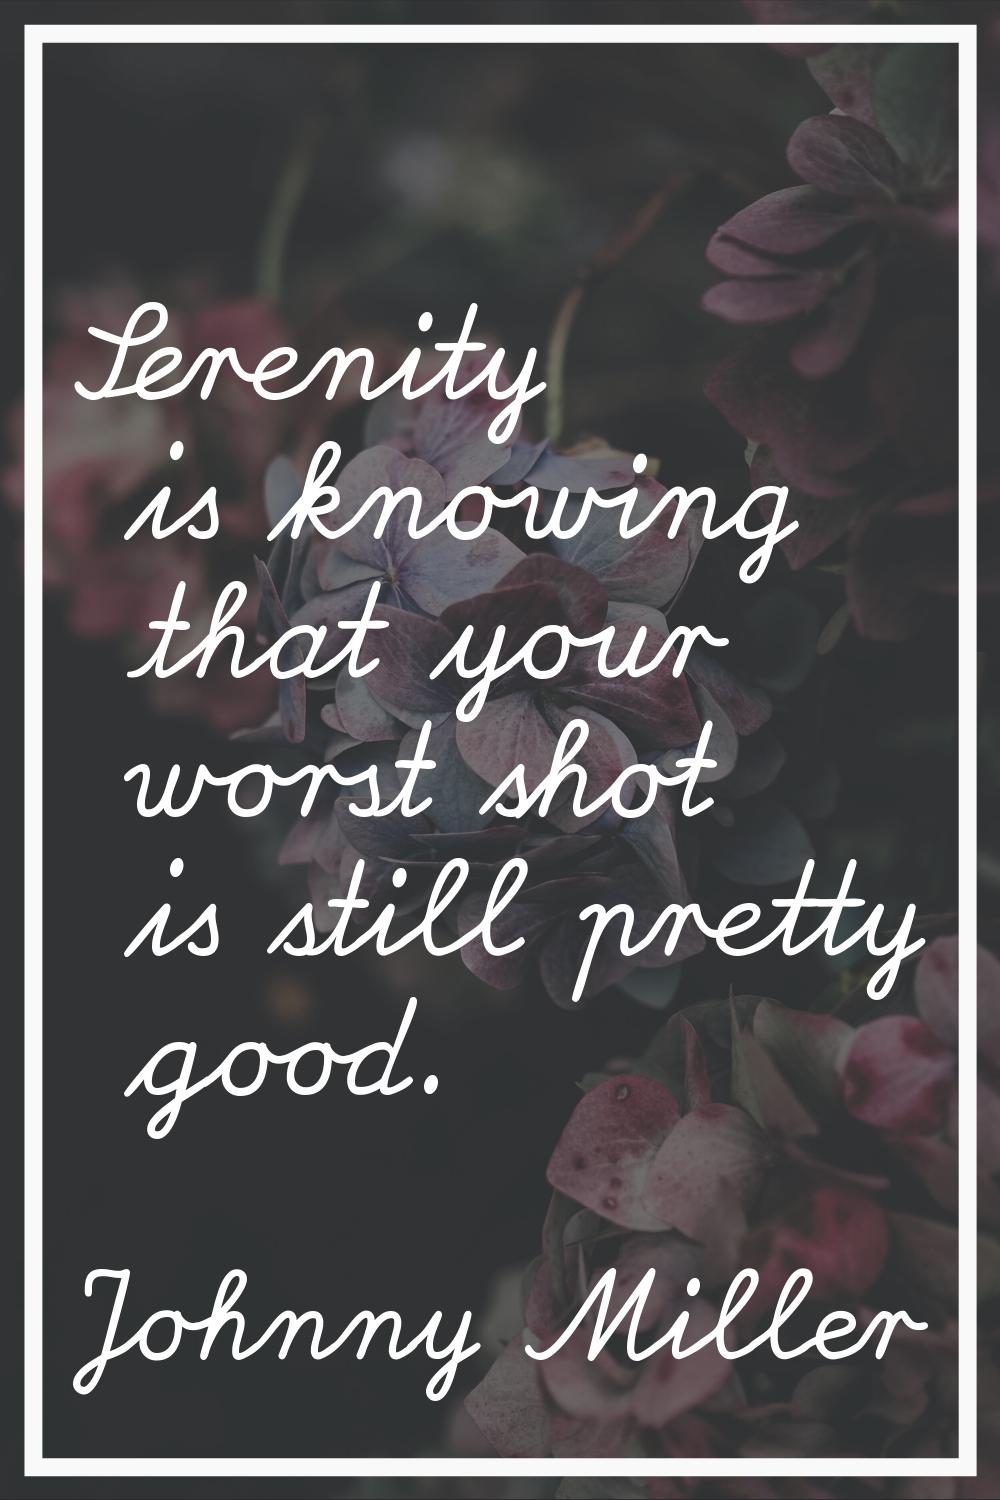 Serenity is knowing that your worst shot is still pretty good.